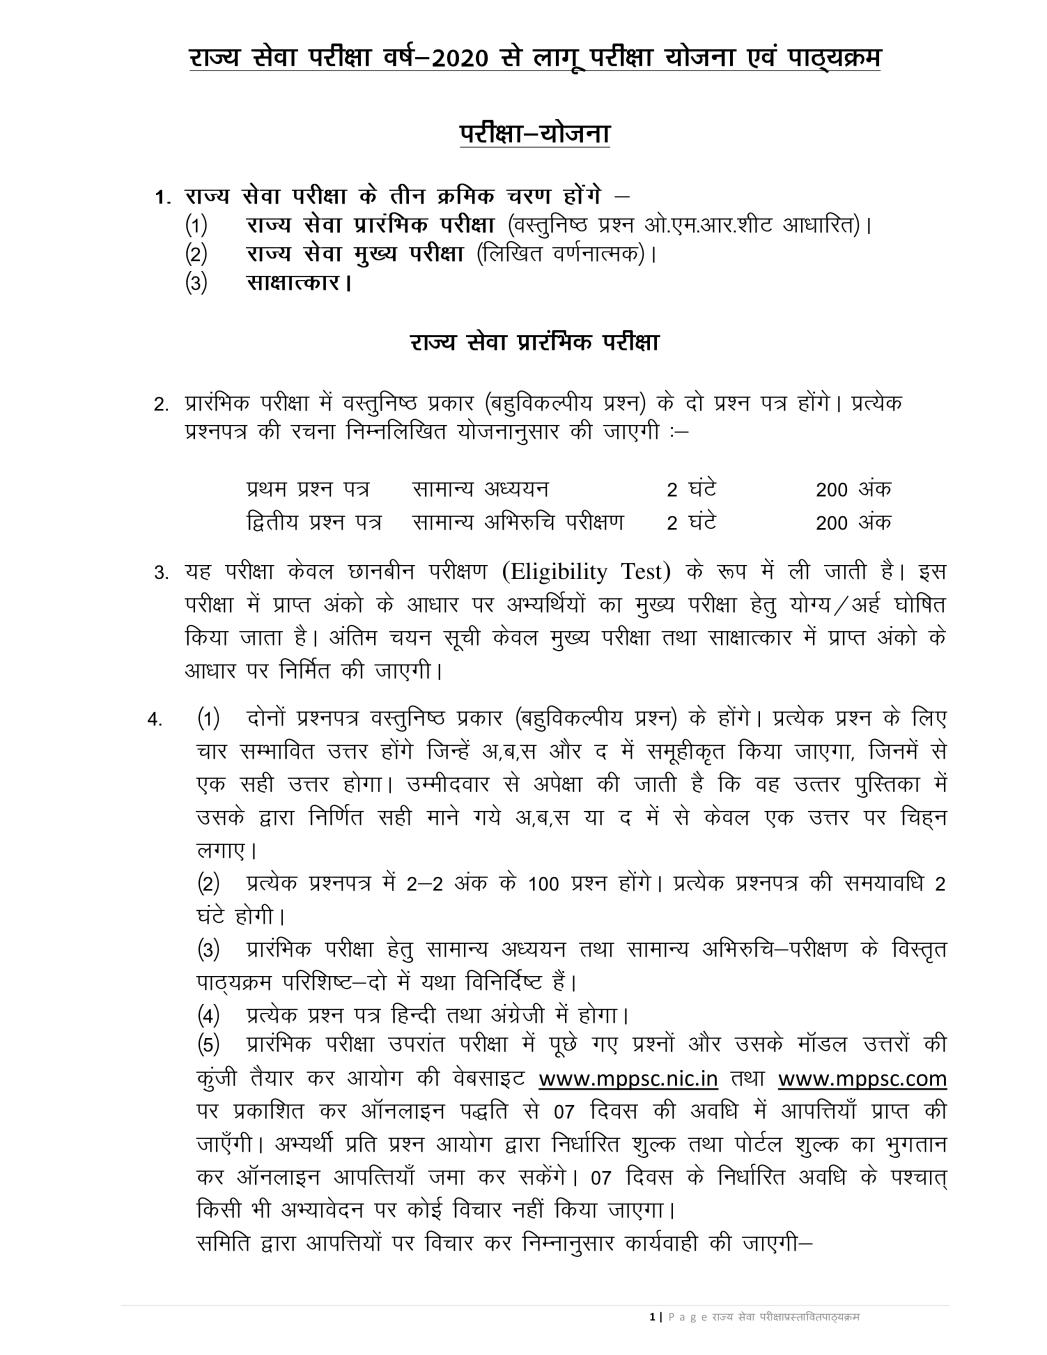 MPPSC State Service Examination (Pre & Mains) Syllabus for 2020 - Page 1